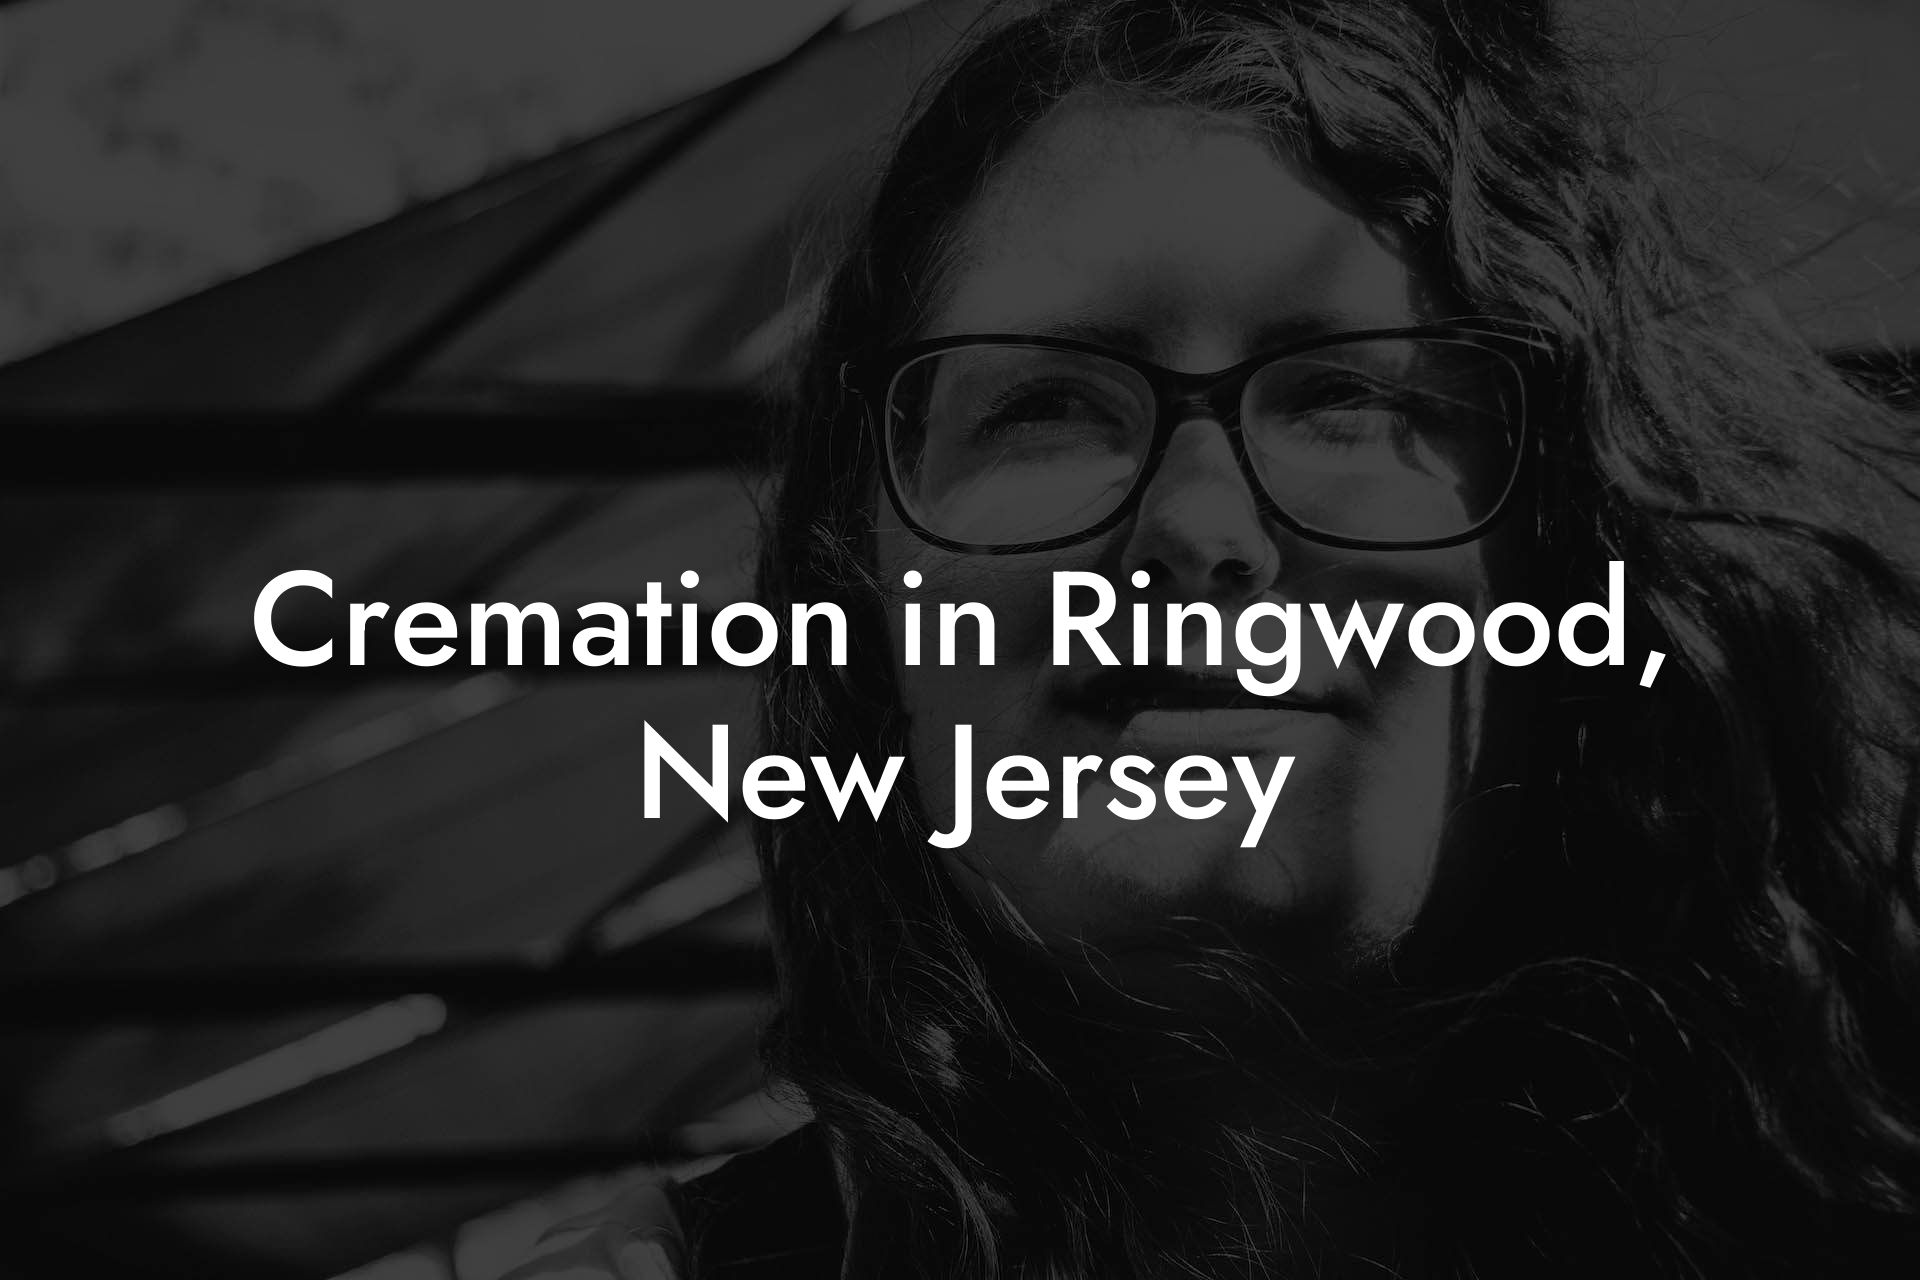 Cremation in Ringwood, New Jersey